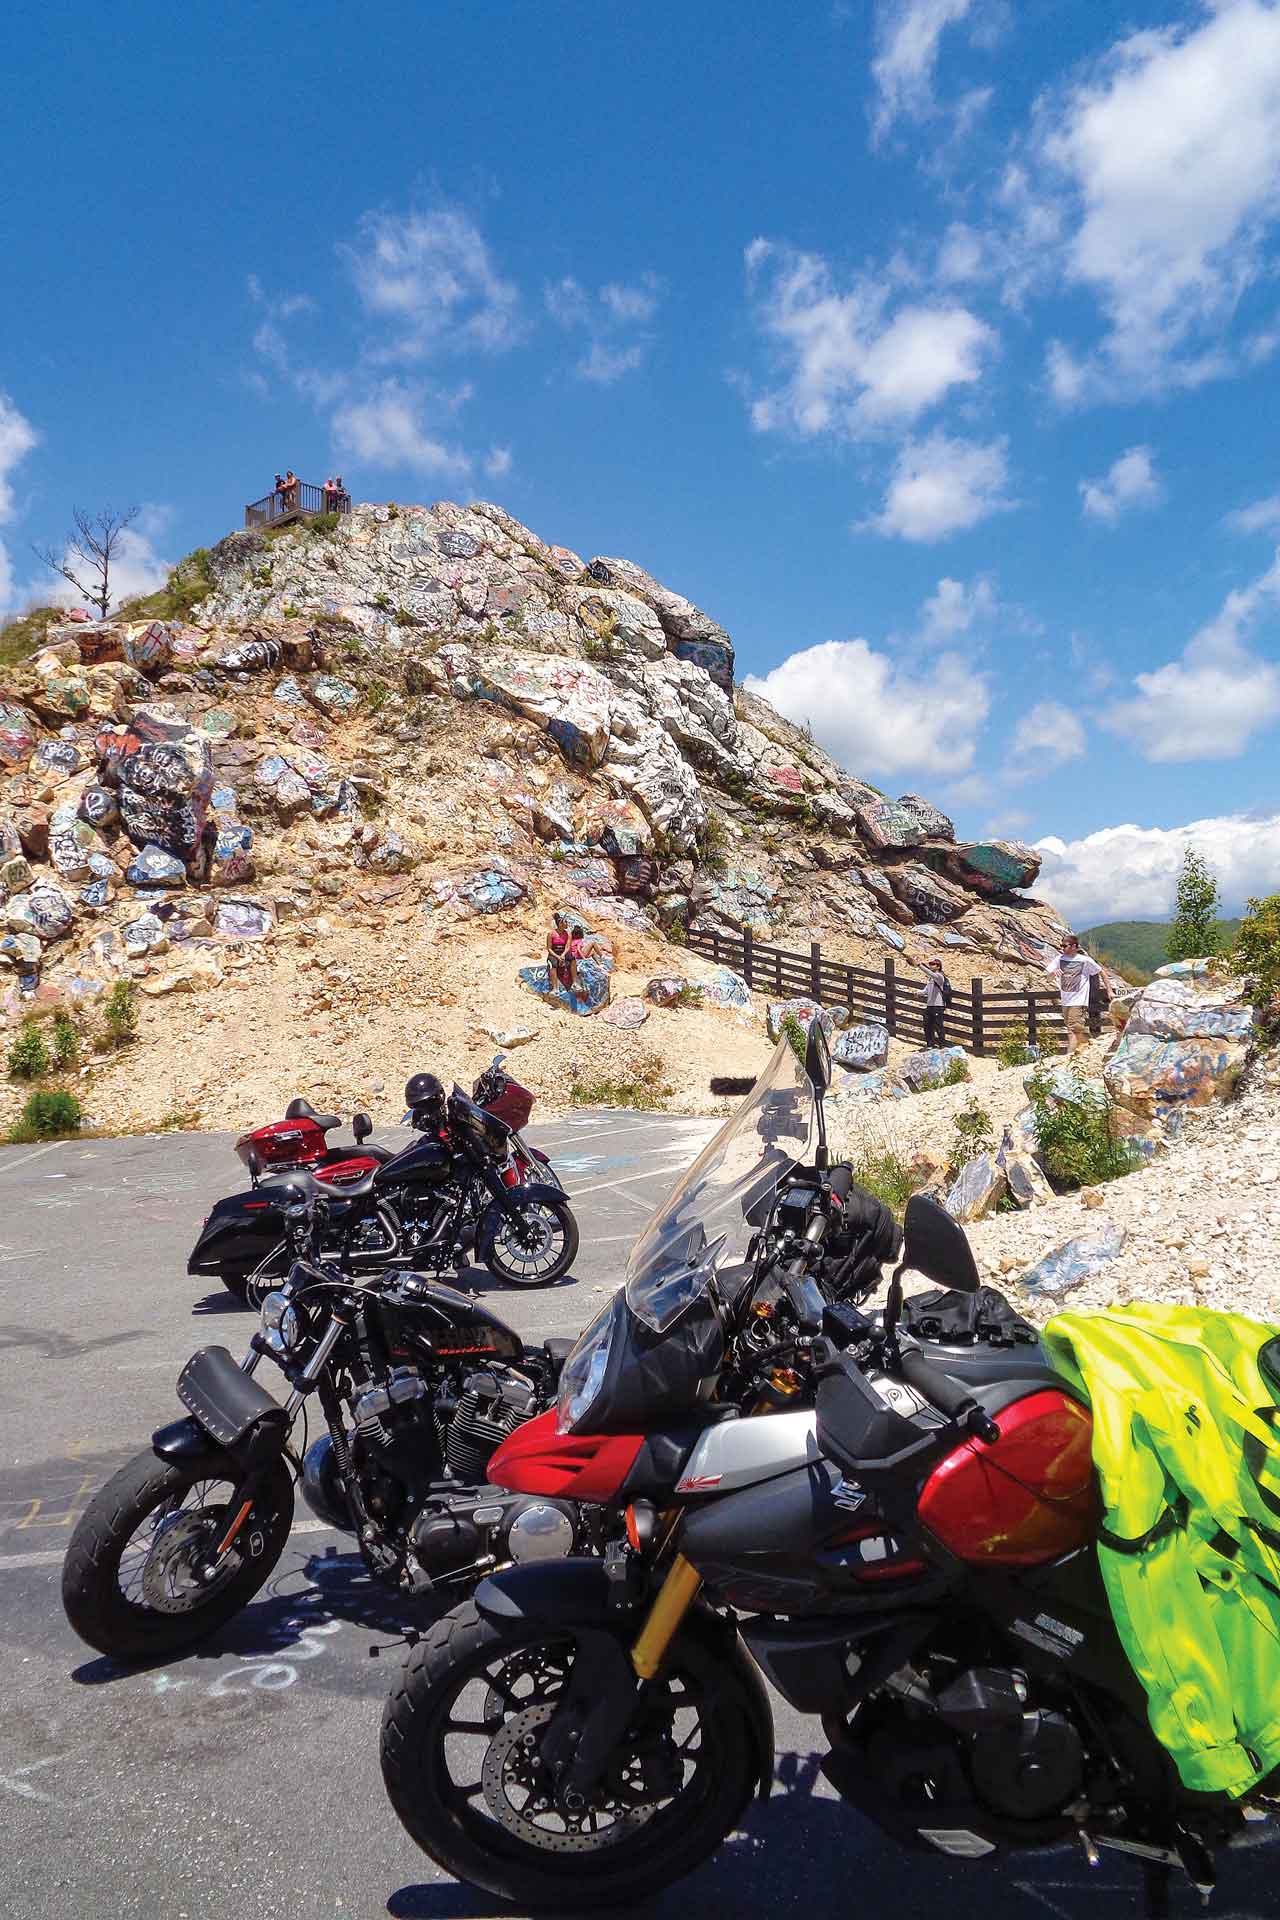 A group of motorcycles are parked in front of a craggy hillside covered in graffiti.